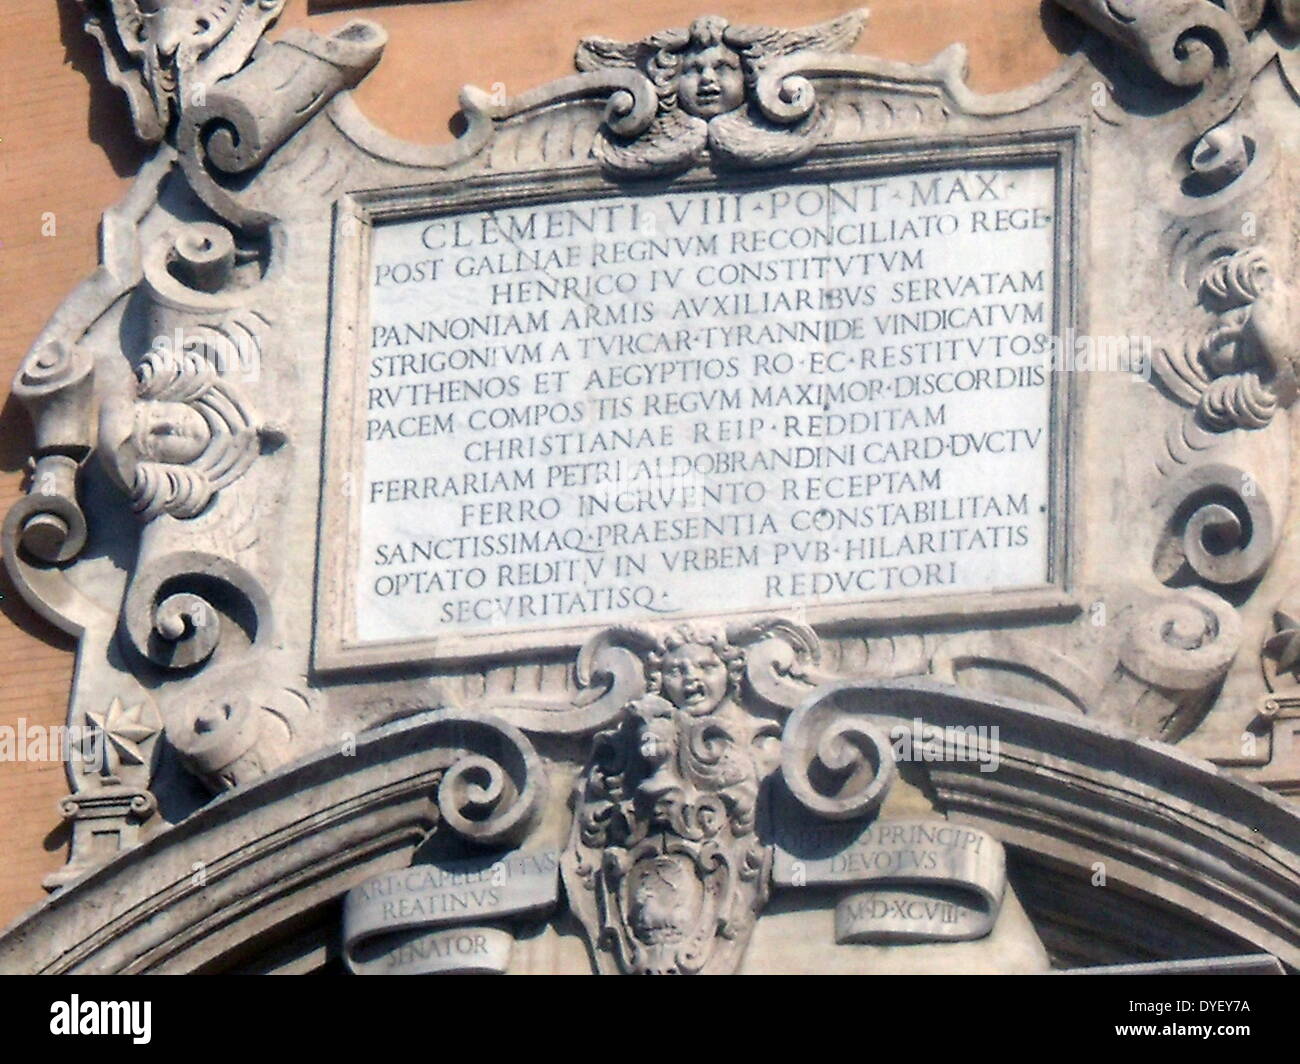 Latin inscription detail from the entrance/courtyard to the Capitolini museums, in Rome, Italy. The museums themselves are contained within 3 palazzi as per designs by Michelangelo Buonarroti in 1536, they were then built over a 400 year period. Stock Photo